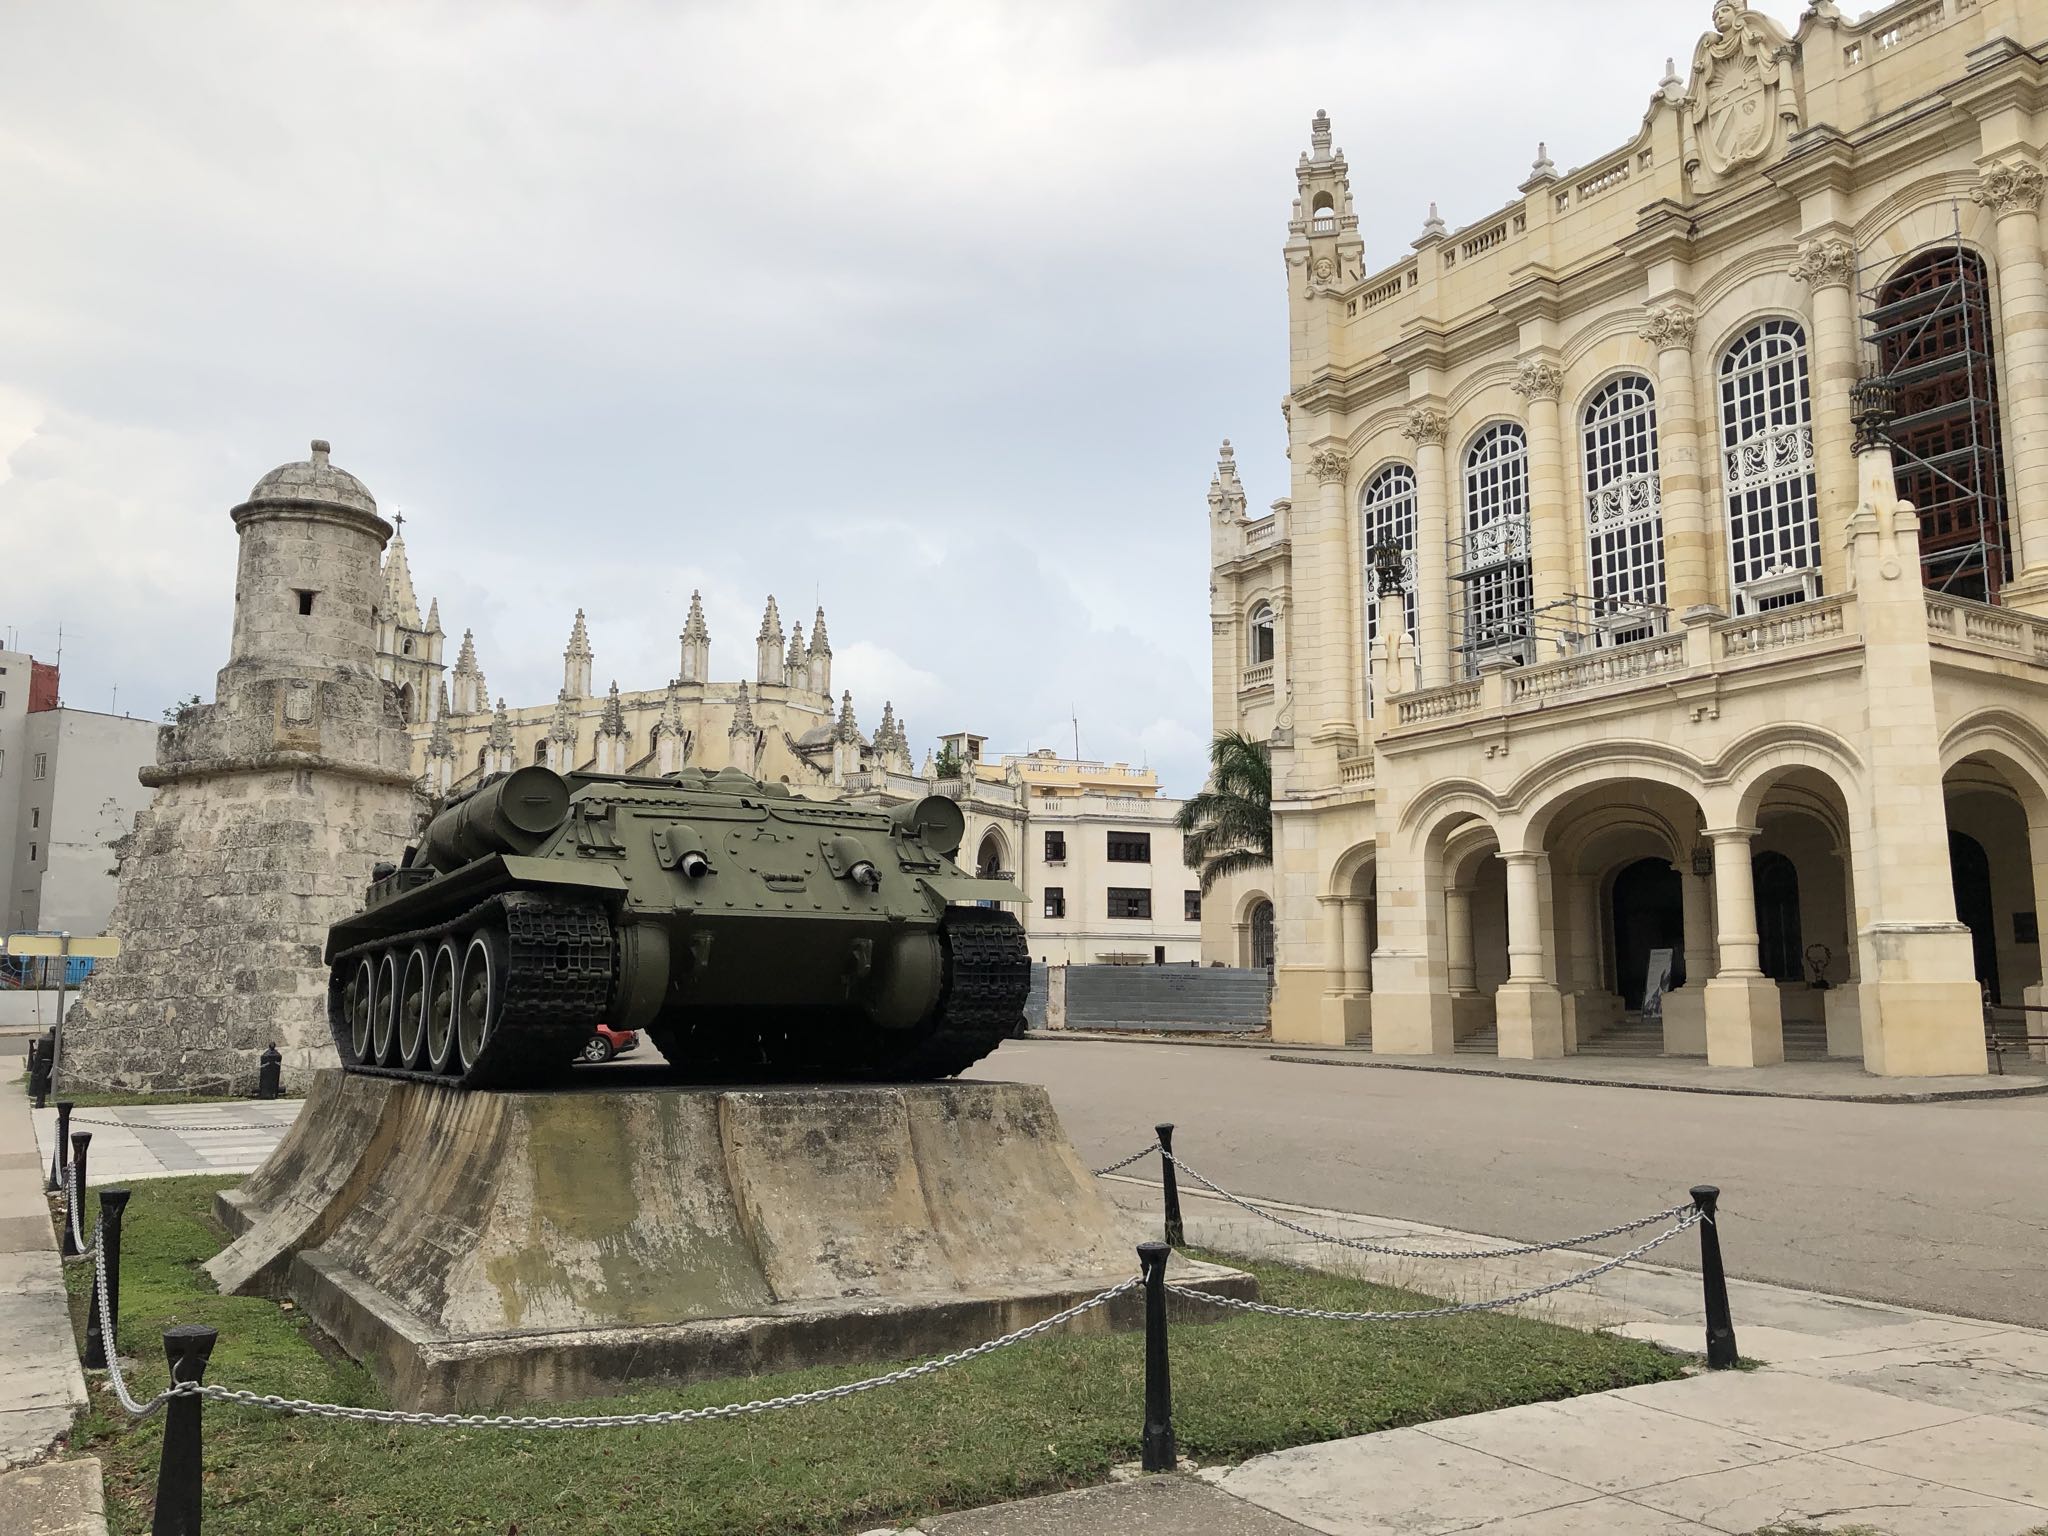 Photo 84 of 221 from the album Highlights Cuba 2019.